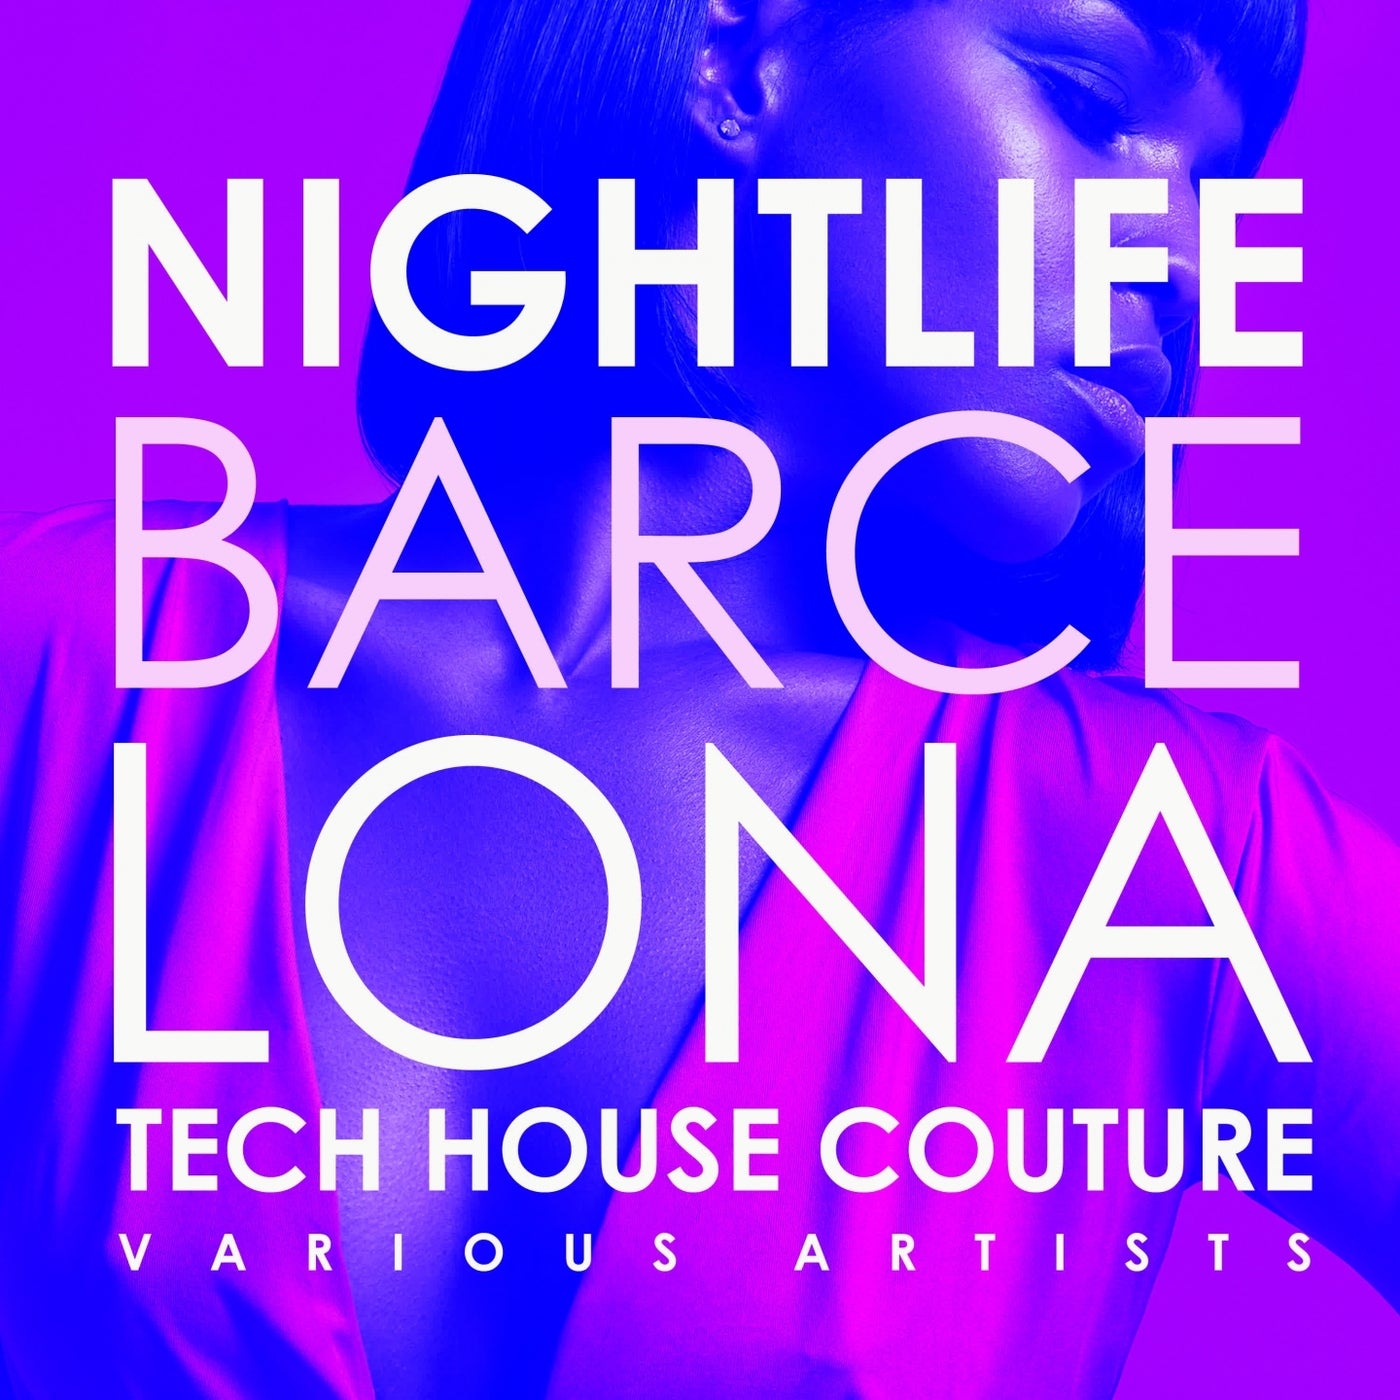 Nightlife Barcelona (Tech House Couture)